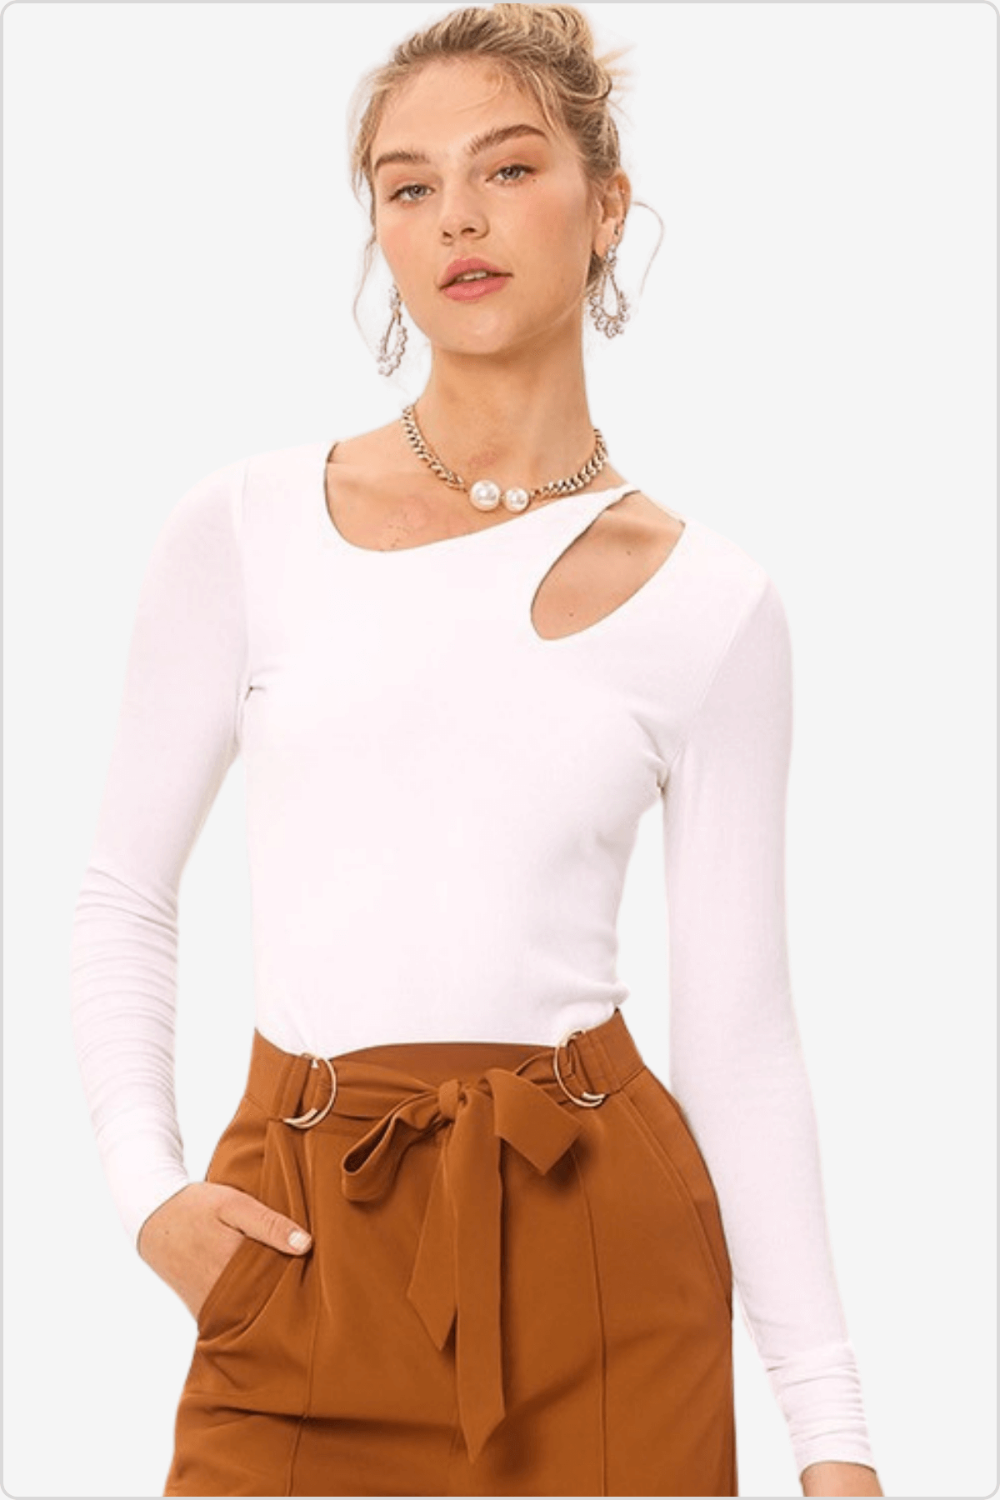 Fashion-forward model in a white knit top with a front cut-out, paired with a pearl choker and high-waist trousers.